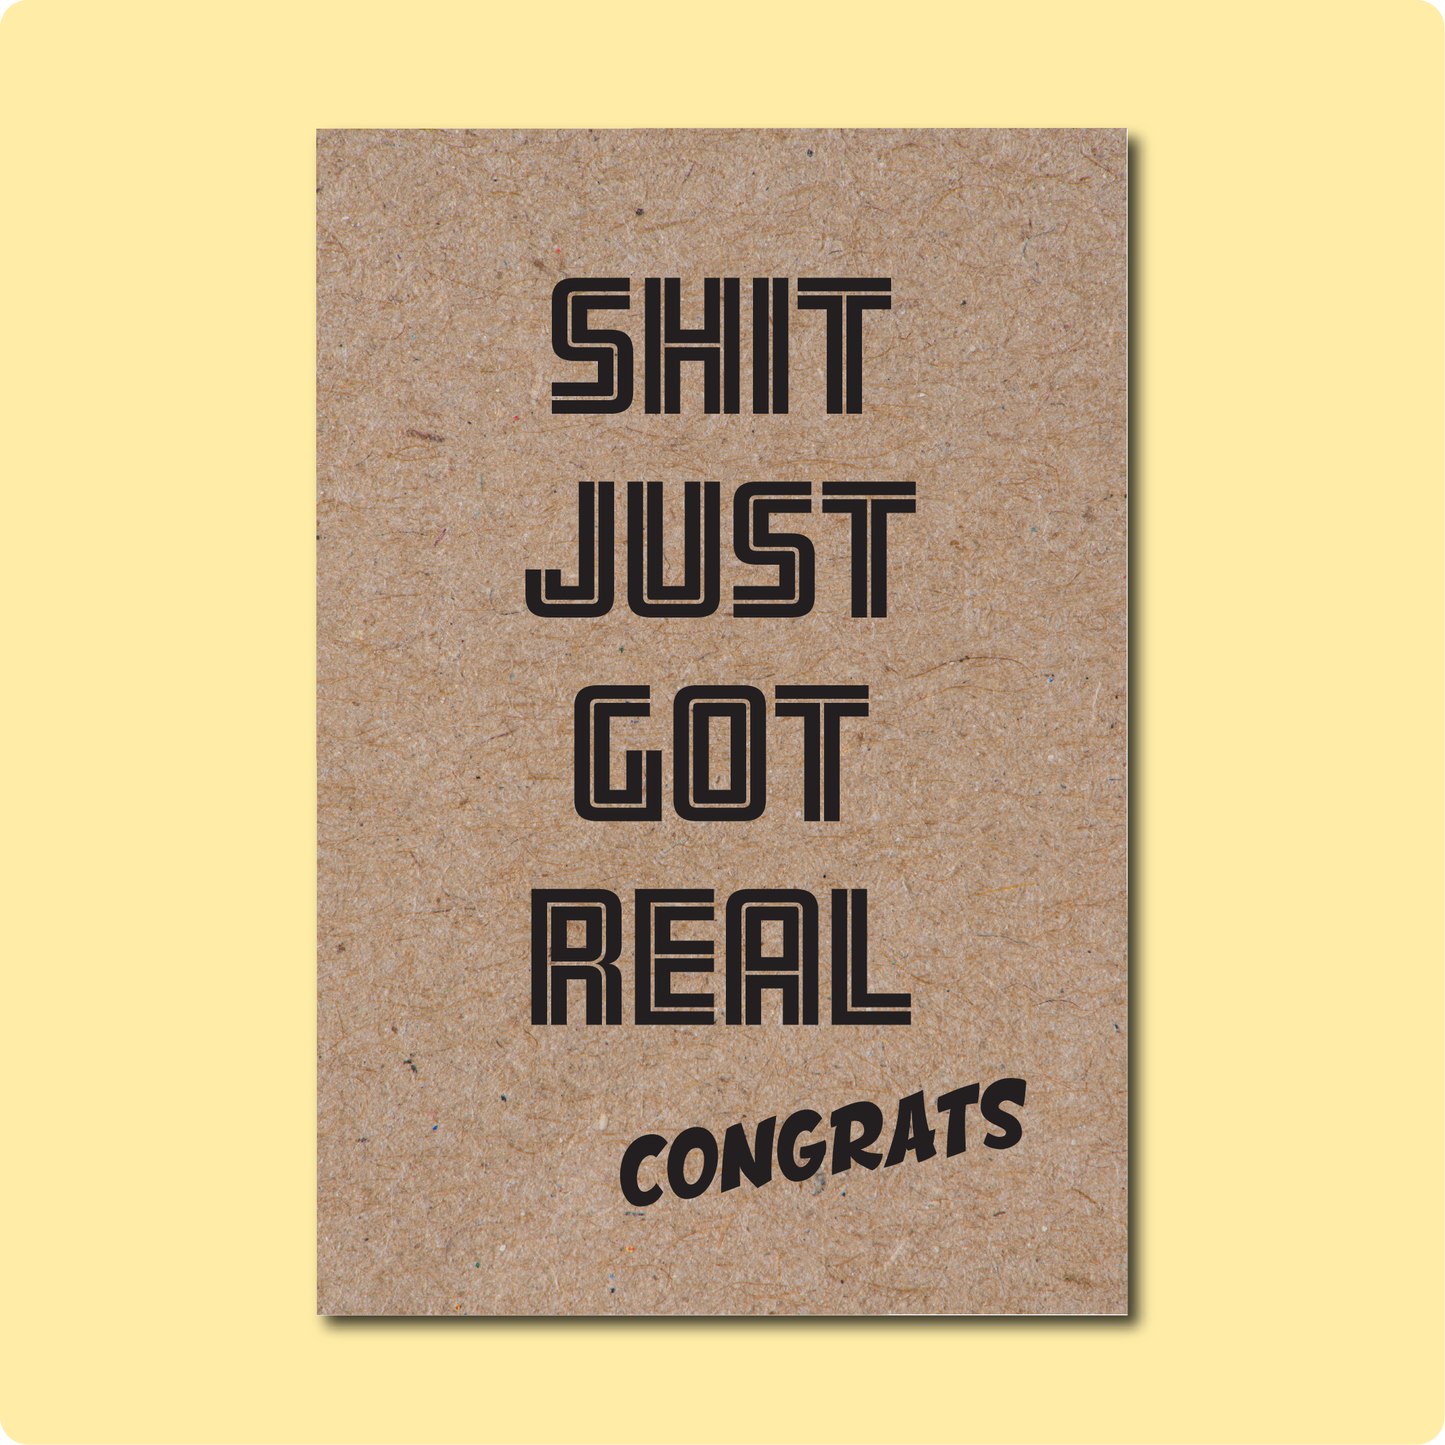  Shit Just Got Real Congratulations Greeting Card for Wedding Engagement Gay LGBT